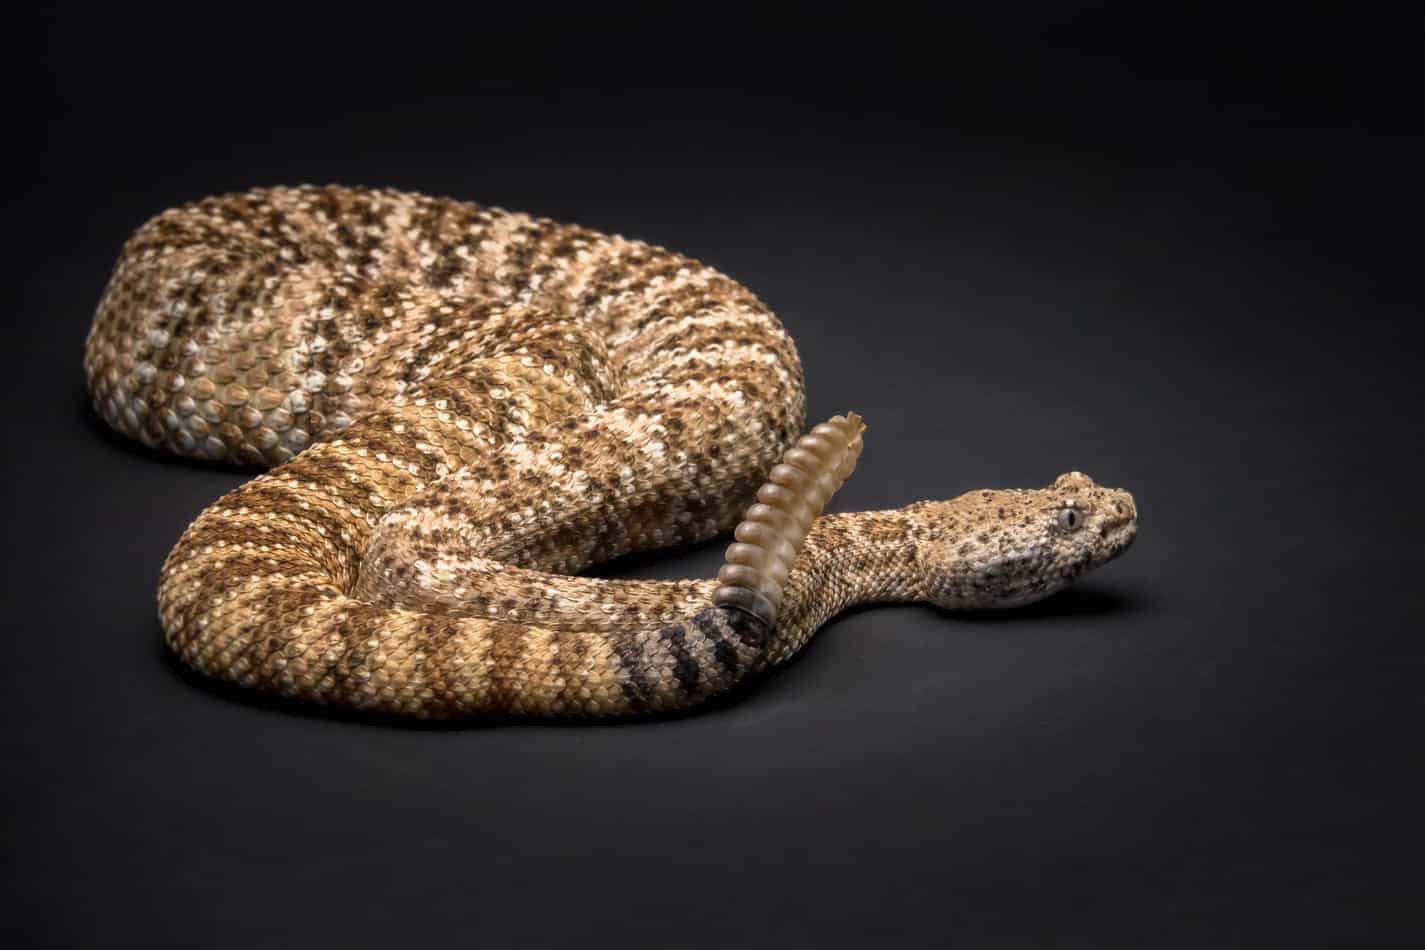 27 fascinating facts about rattlesnakes 2 27 Fascinating Facts About Rattlesnakes (With Pictures)